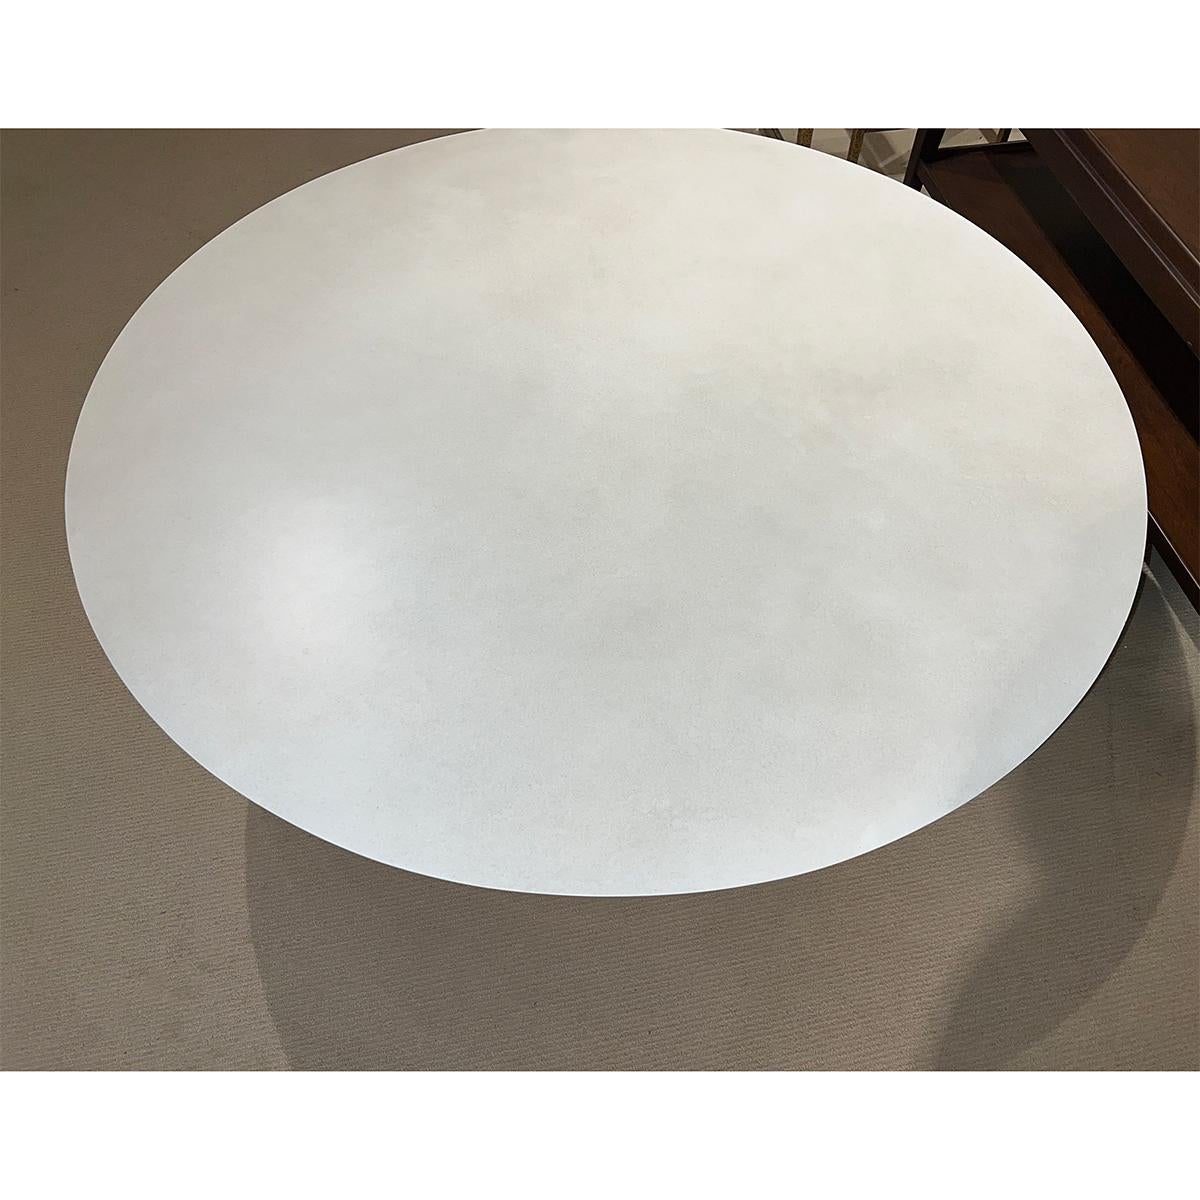 Wood Contemporary Round Coffee Table For Sale